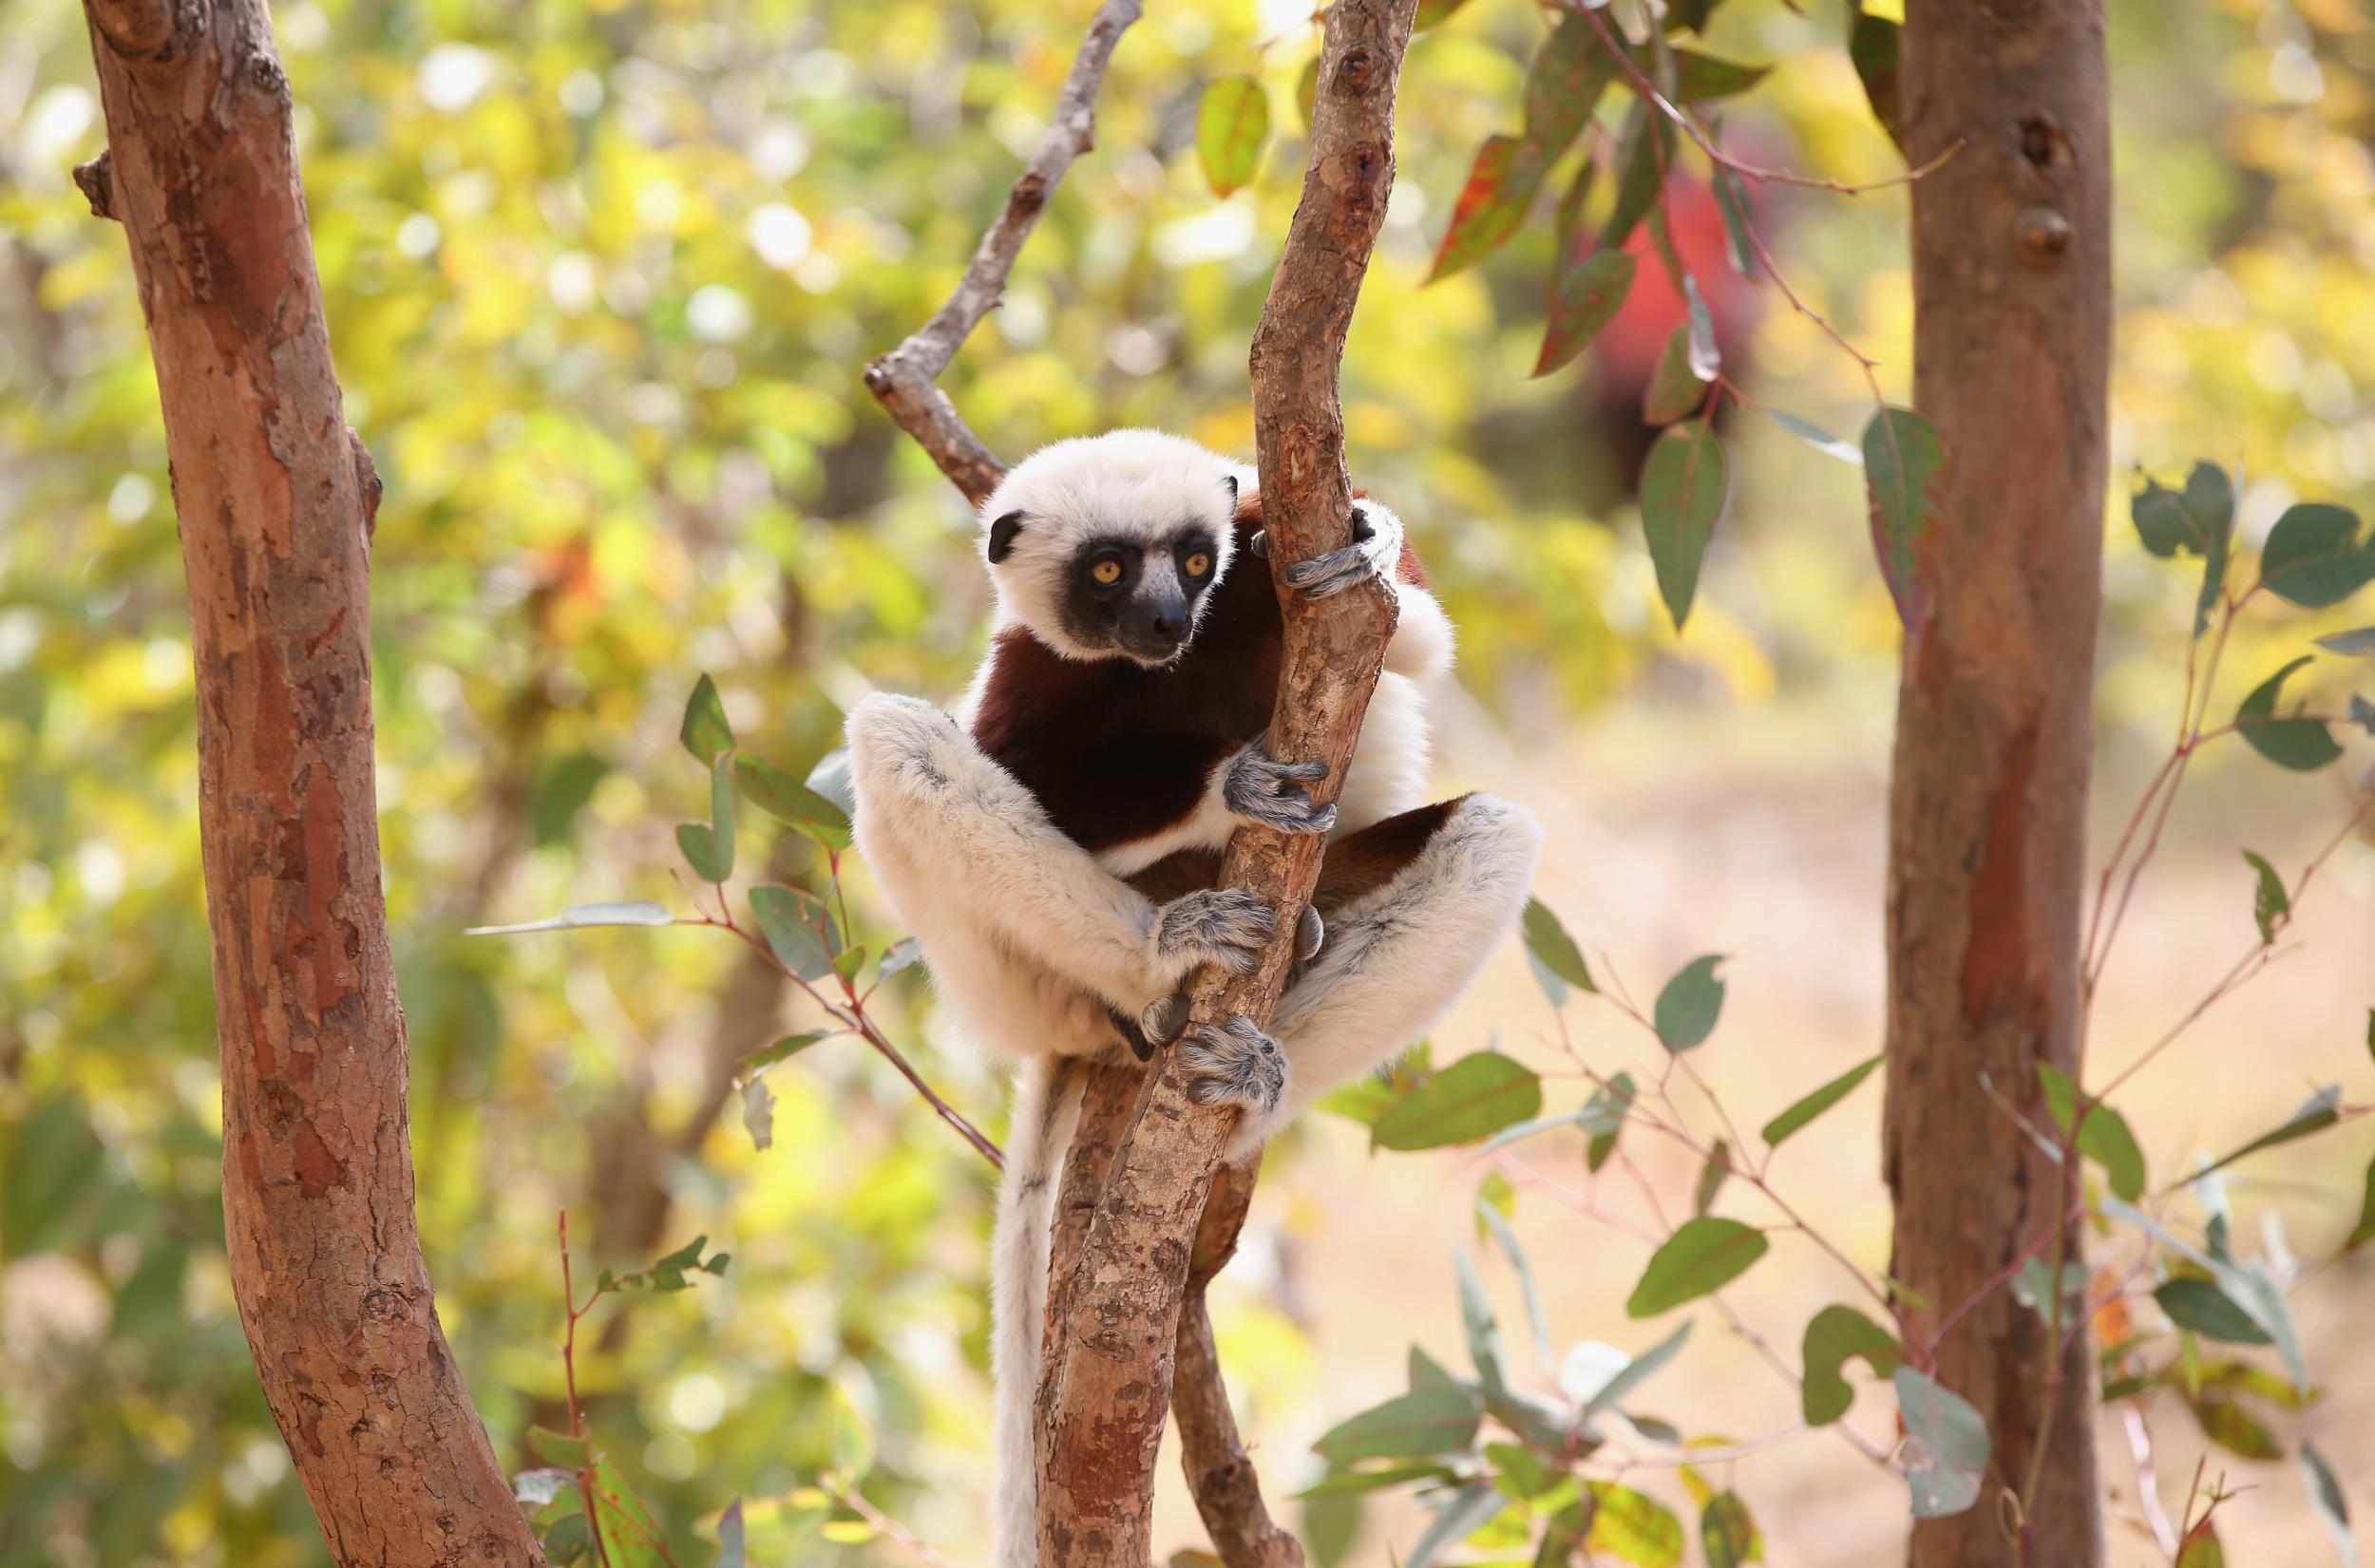 Lemurs are being illegally hunted in Madagascar